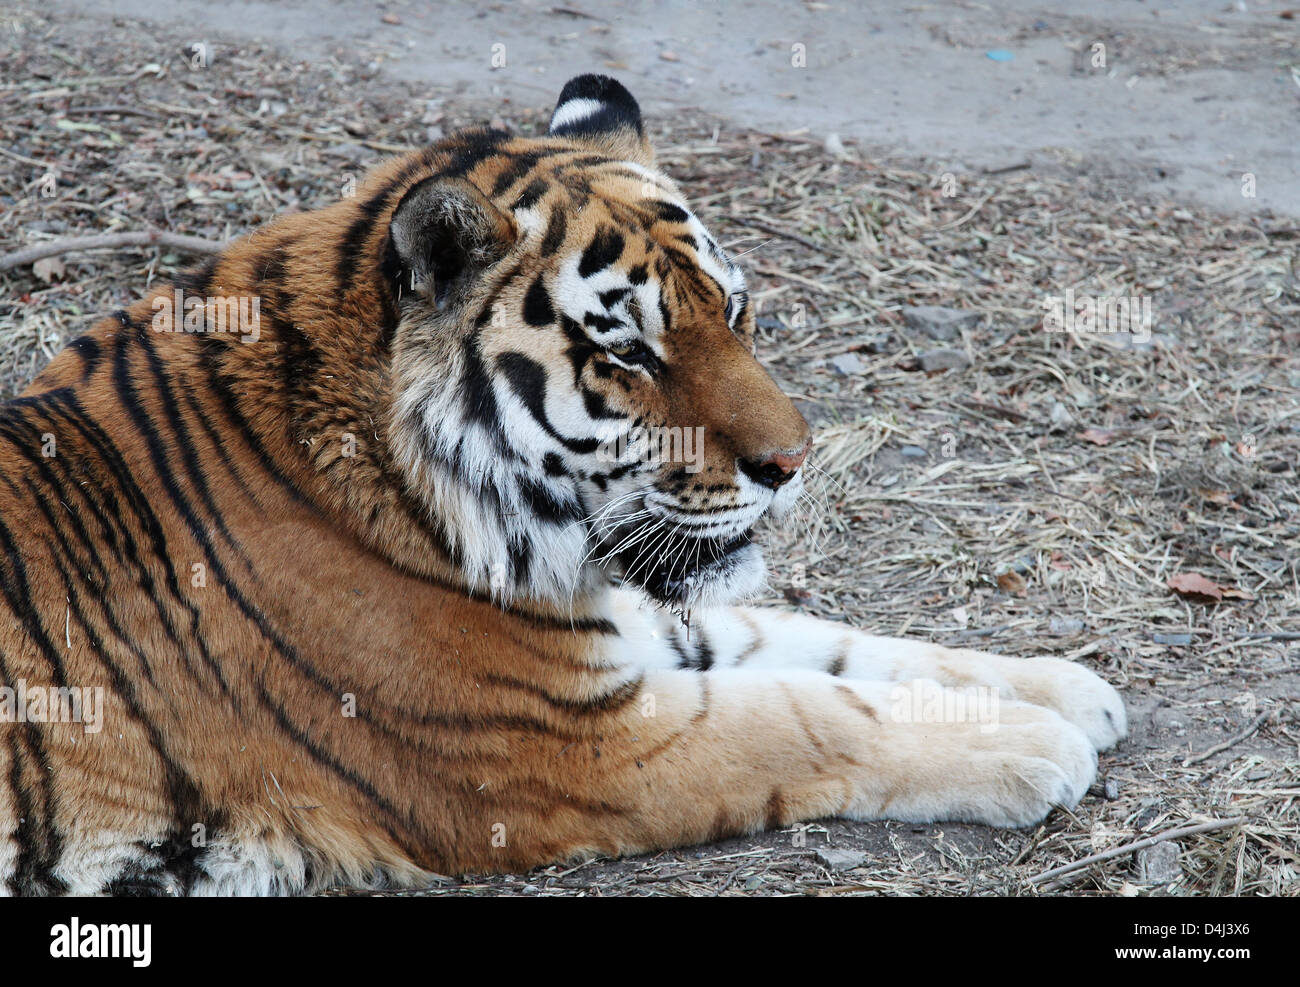 A northeast tiger lay on the grass in the Beijing zoo in winter Stock Photo